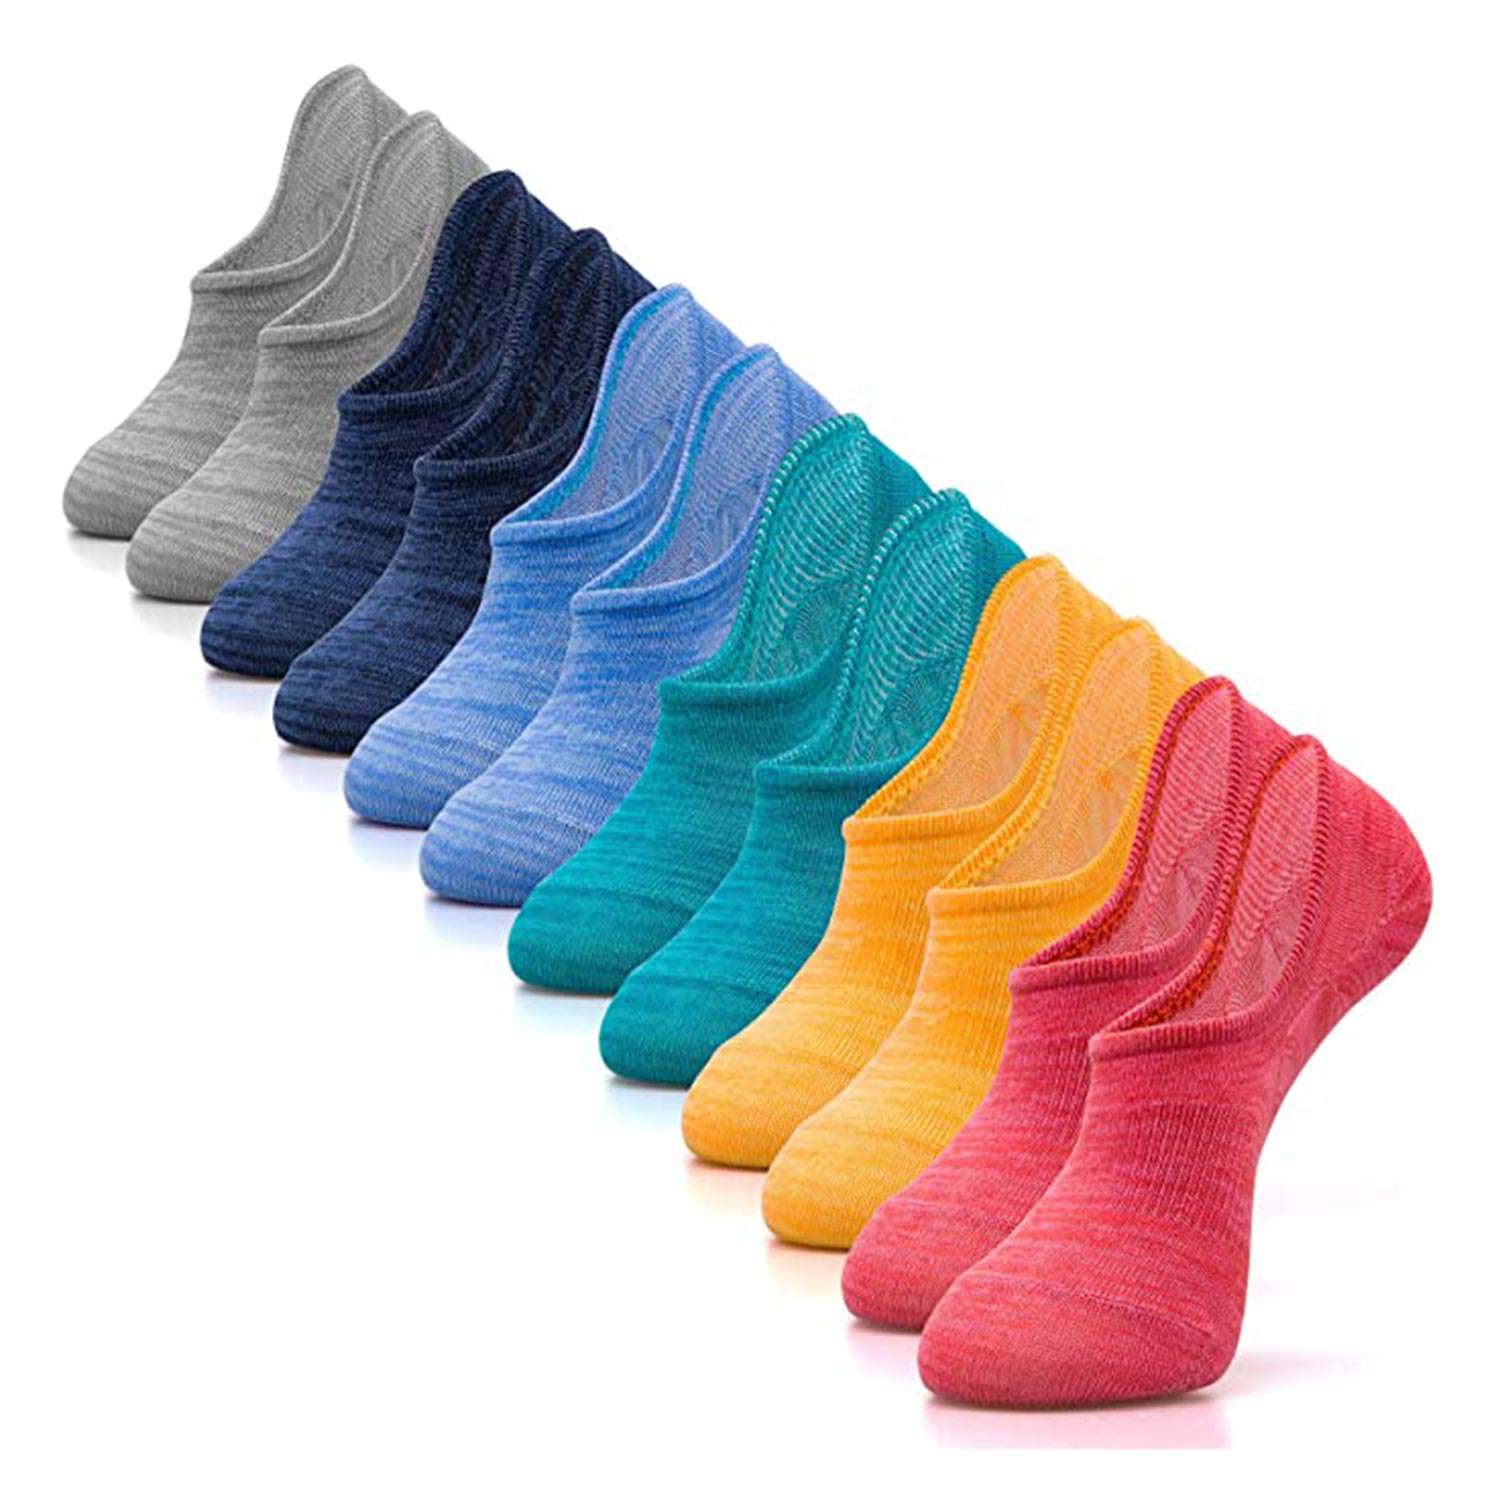 IDEGG No Show Socks For Women and Men Bundle 6 Pairs & 8 Pairs Low Cut Anti-slid Athletic Sport Line Cotton Socks with Non Slip Grip 